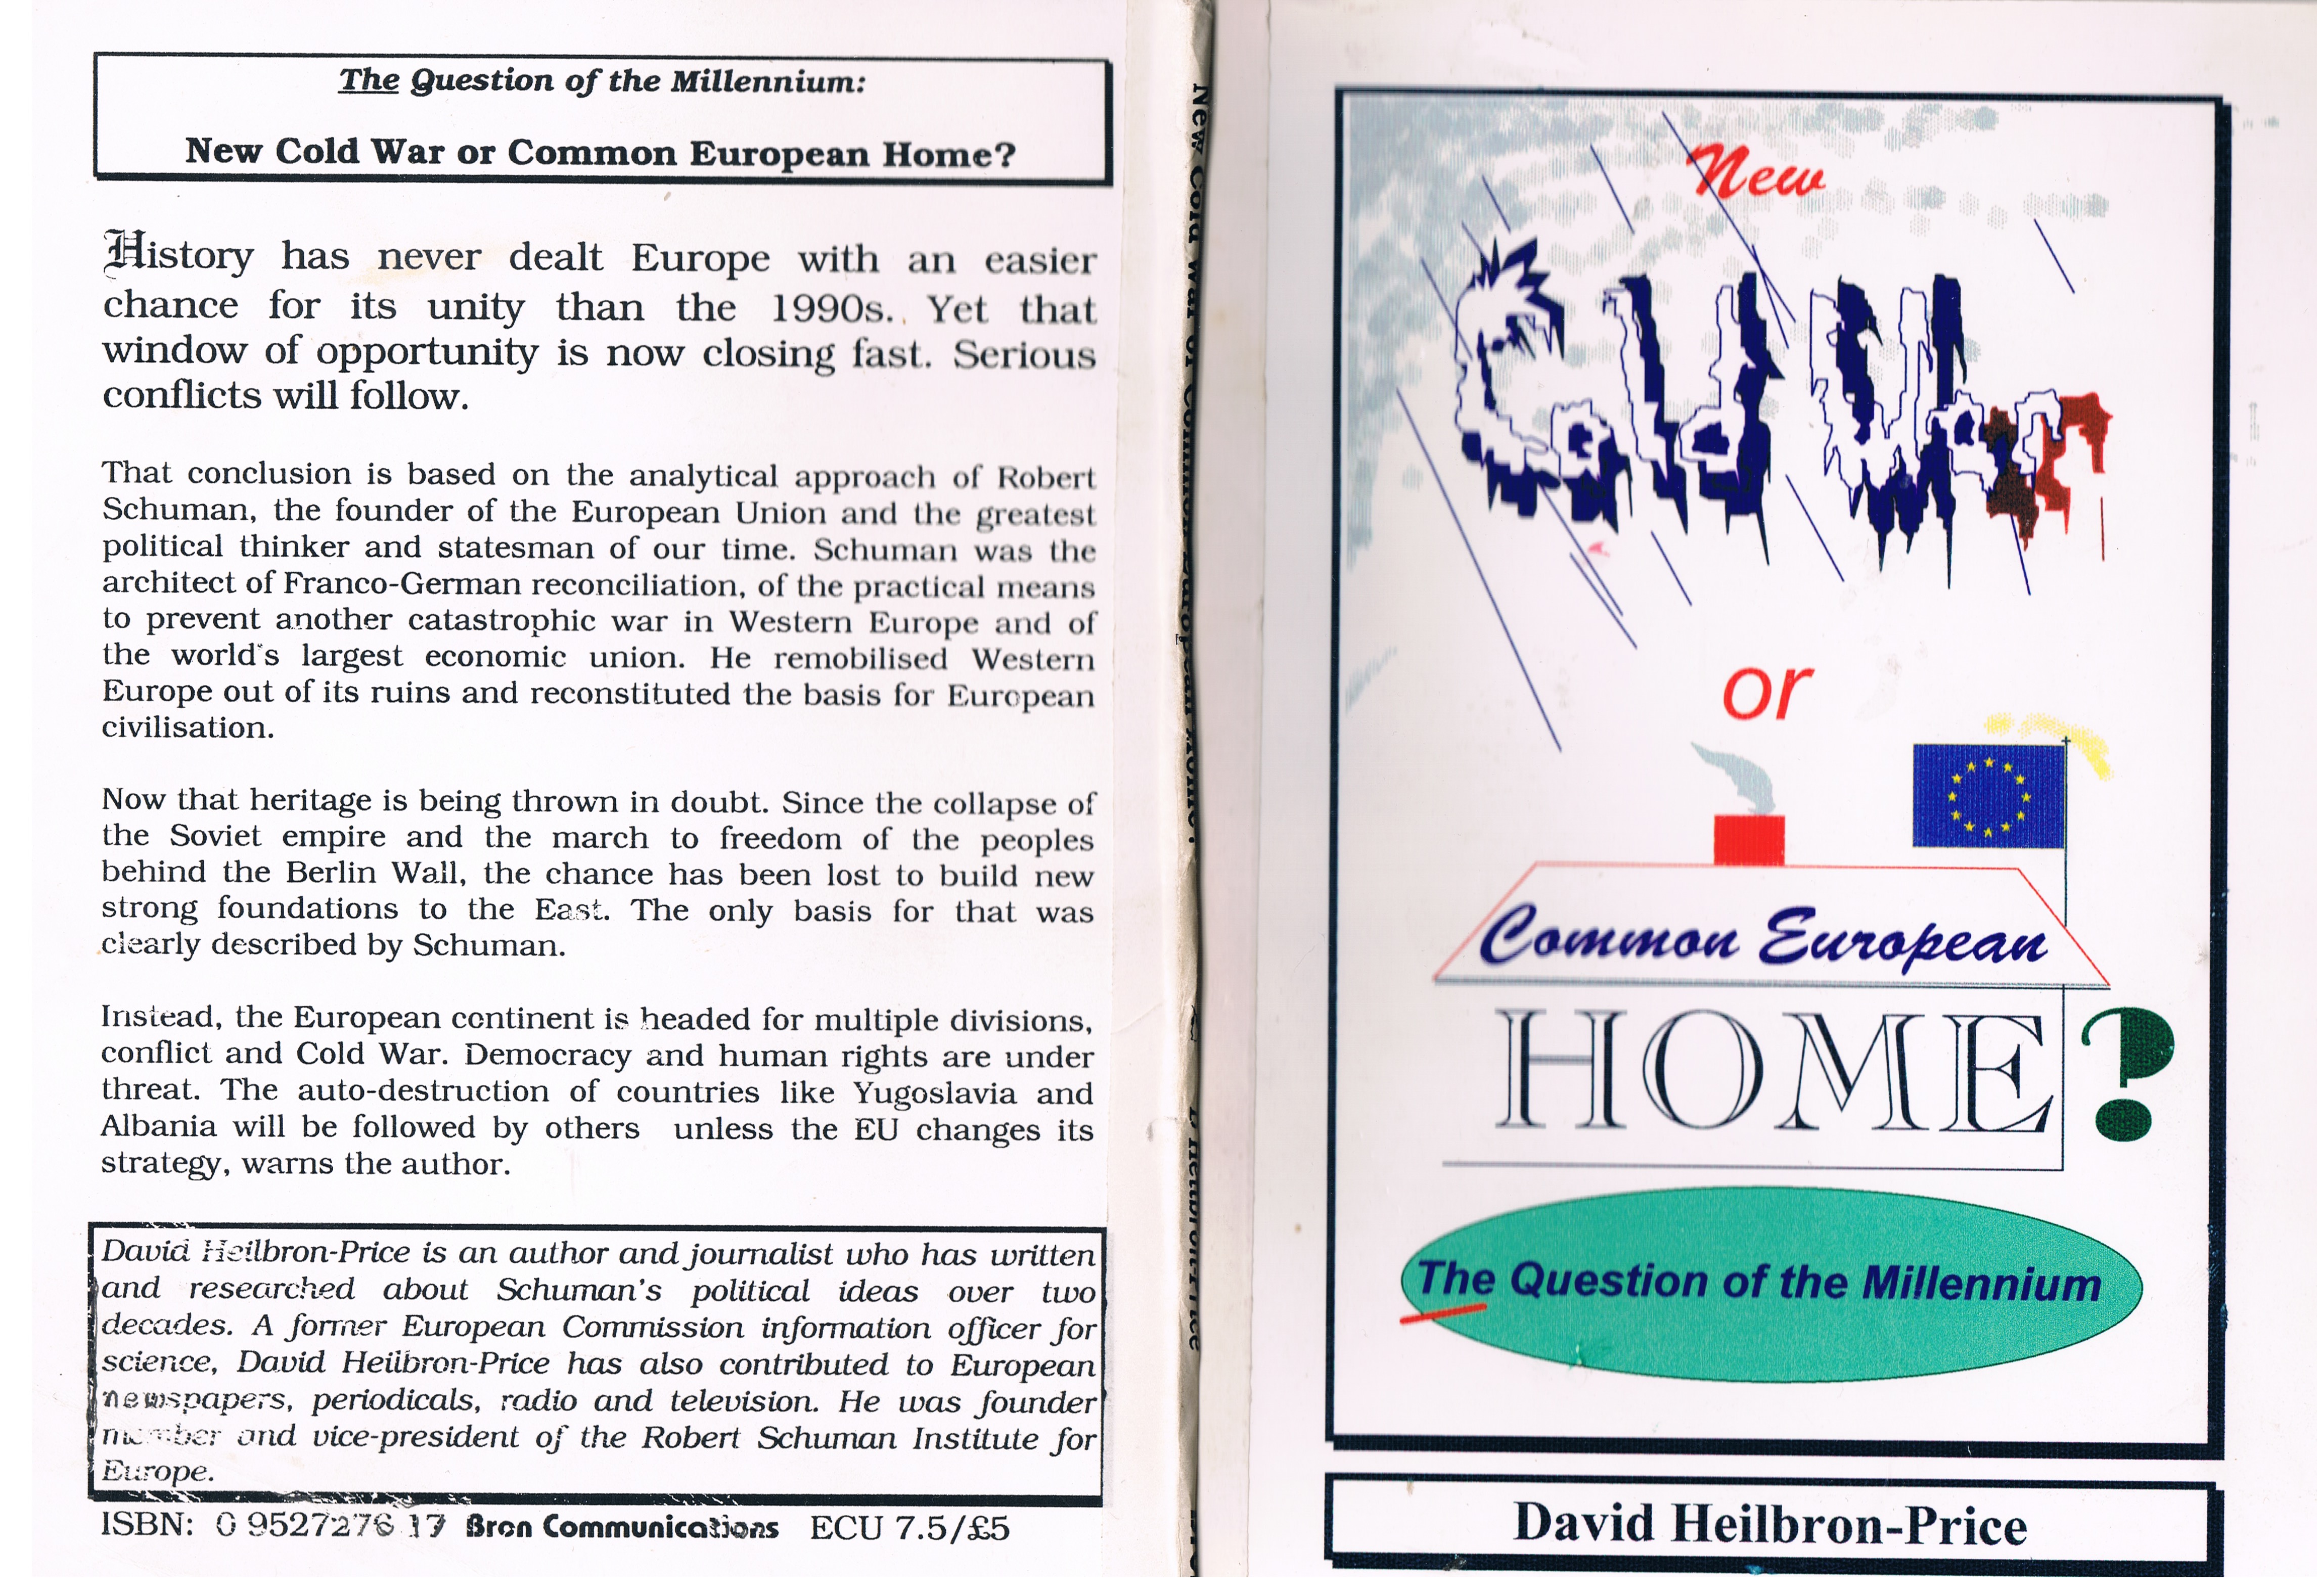 Book: New Cold War or Common European Home?